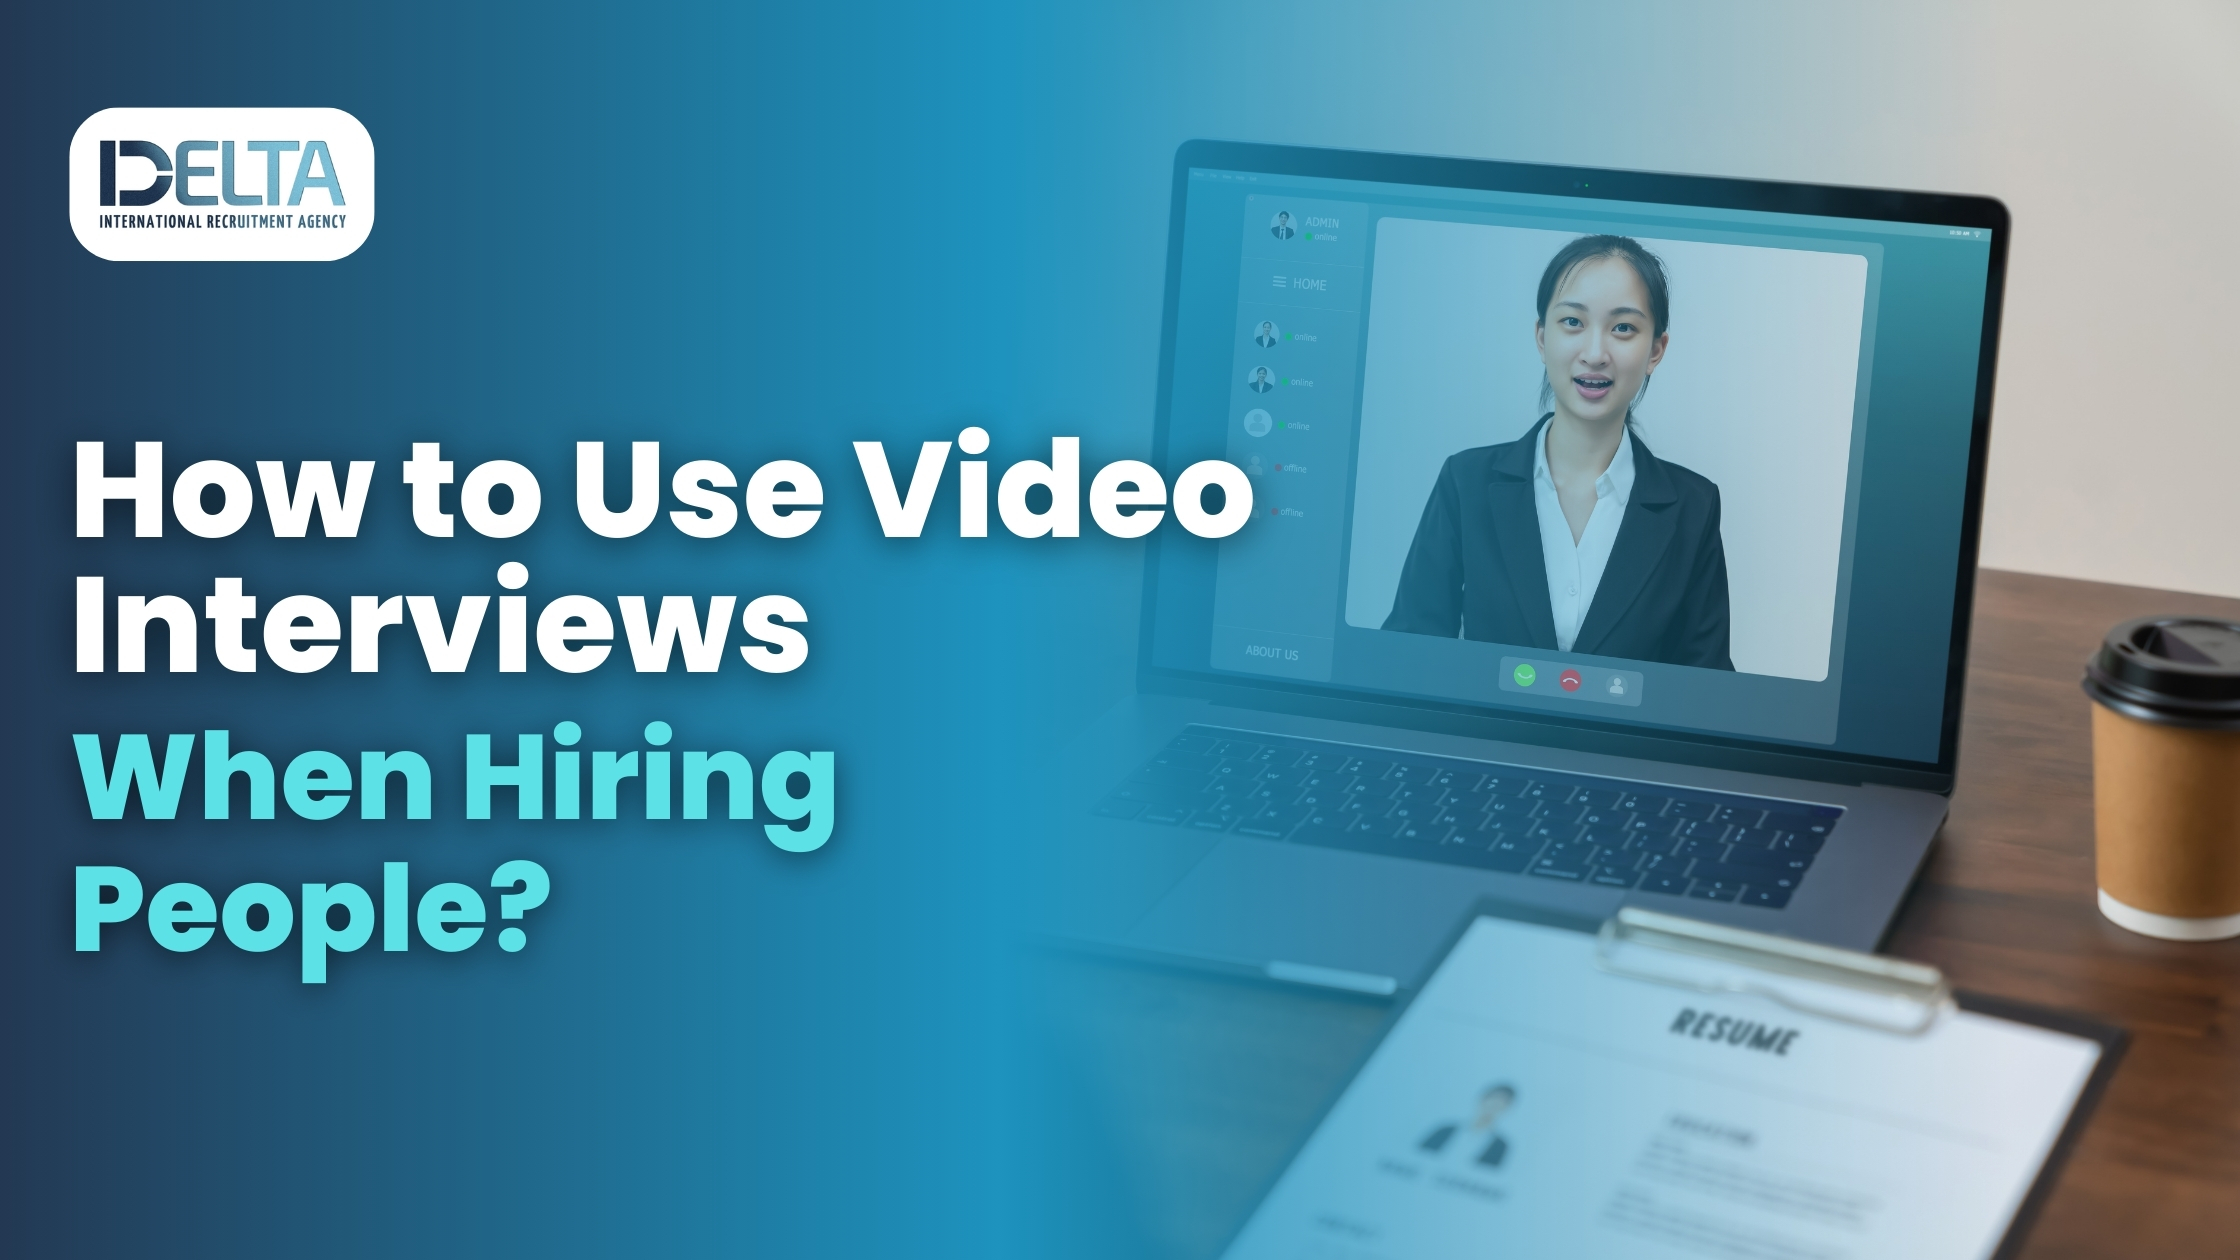 How to Use Video Interviews When Hiring People?